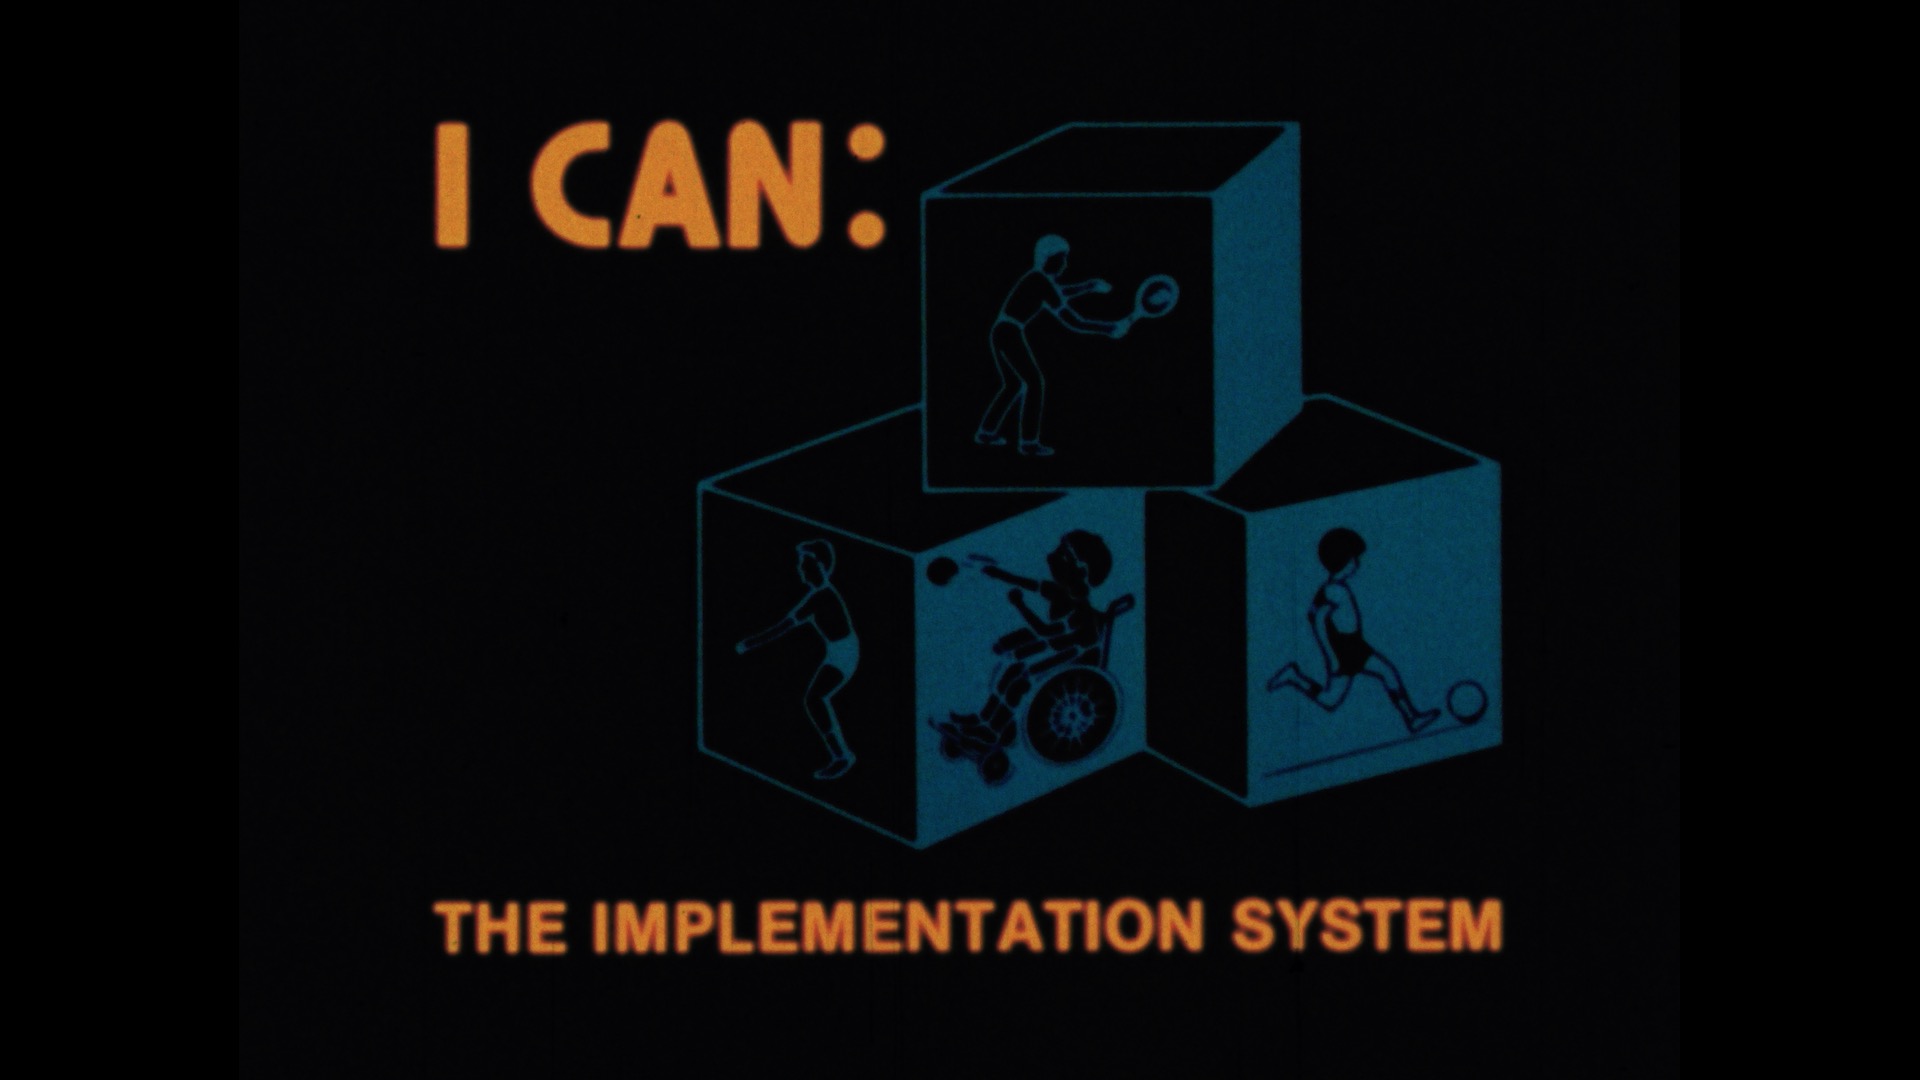 I CAN: The Implementation System, 1979